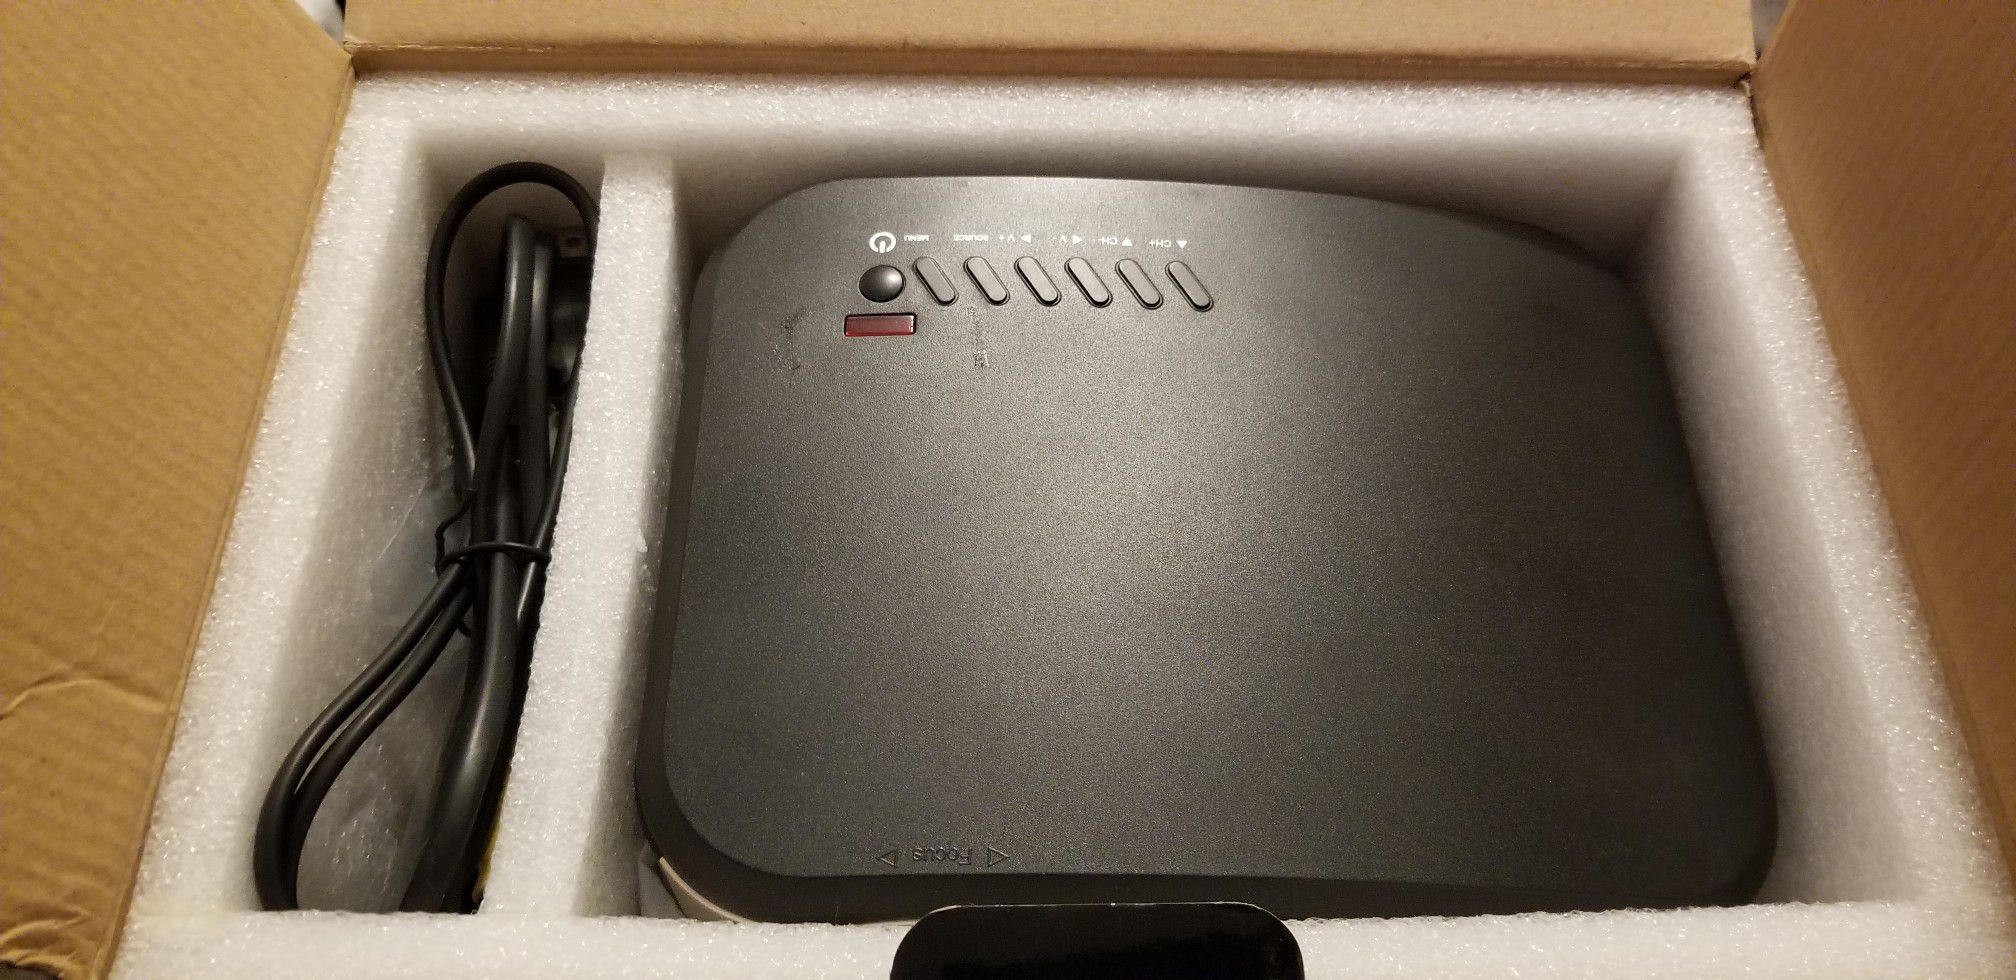 Wireless Projector in box barely used